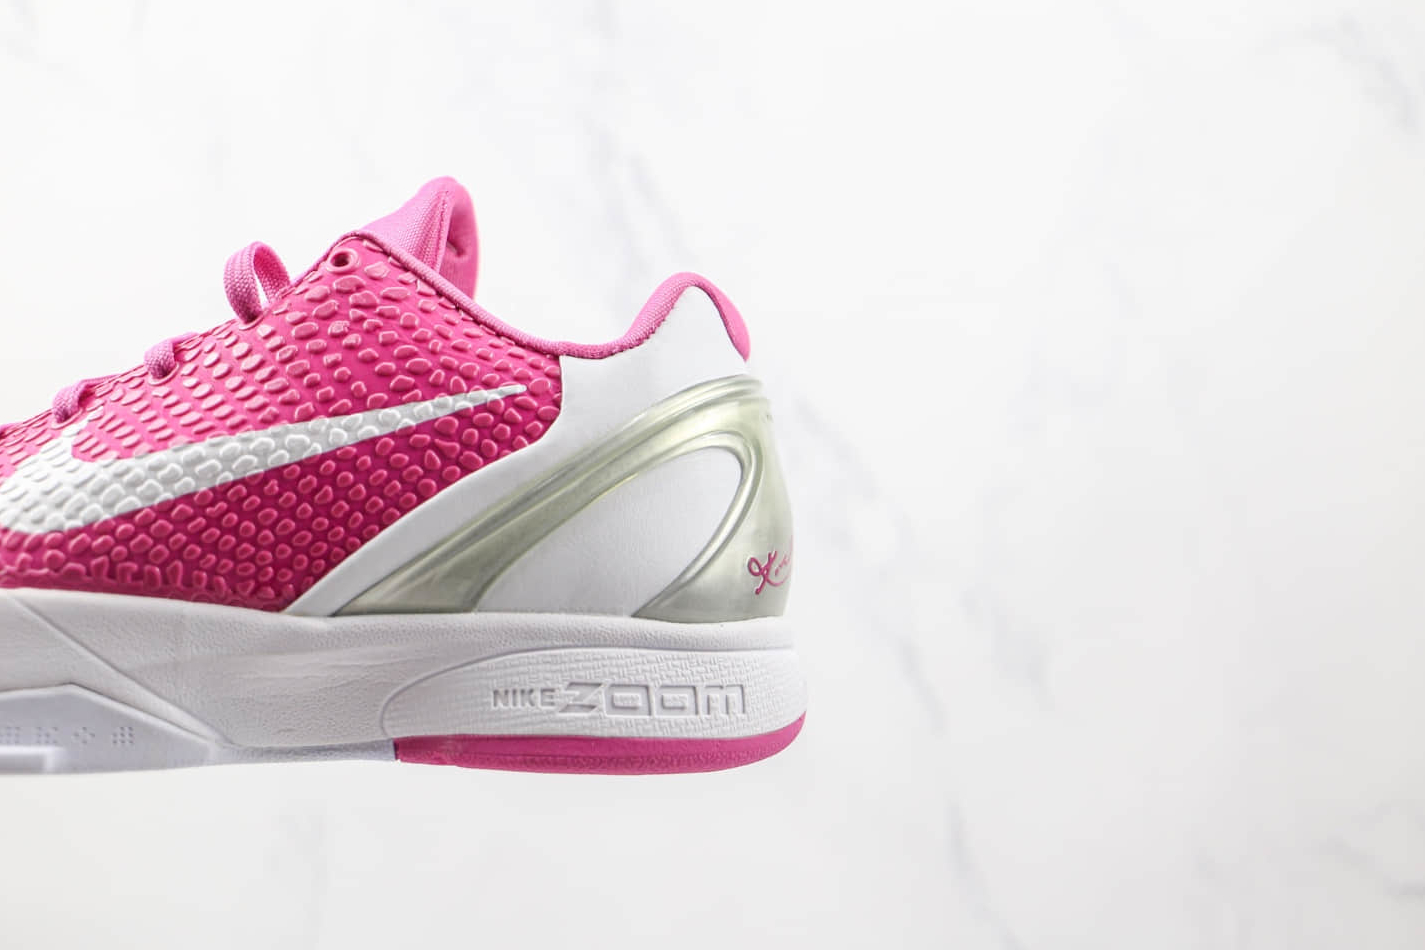 Nike Zoom Kobe 6 Protro 'Think Pink' - DJ3596-600 | Limited Edition Release